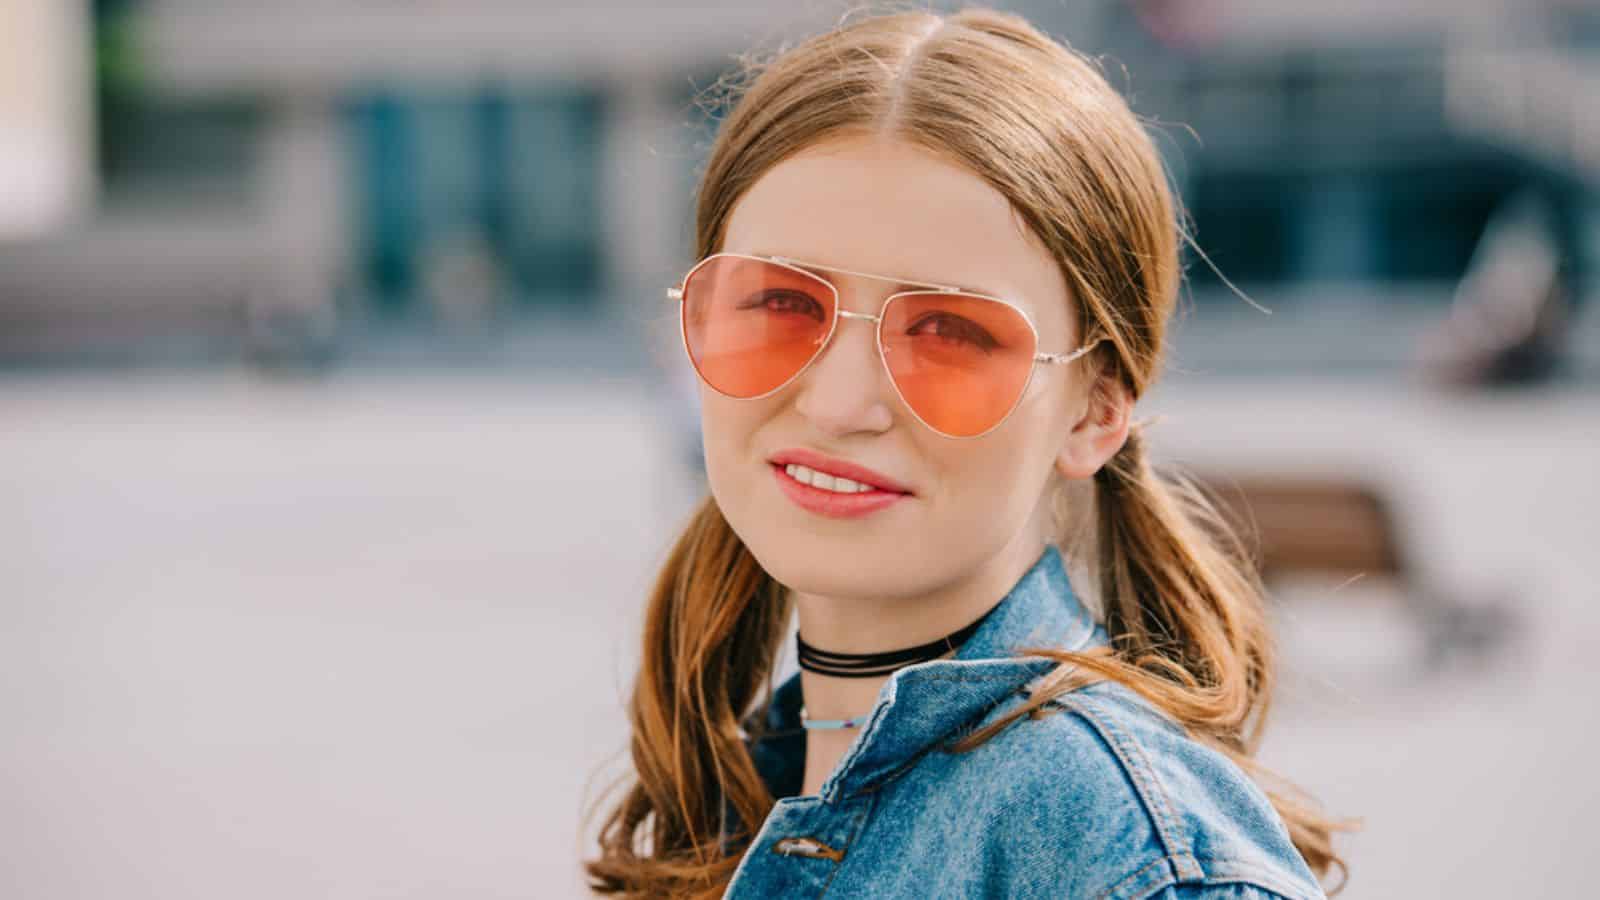 Portrait of beautiful young woman in sunglasses and denim jacket